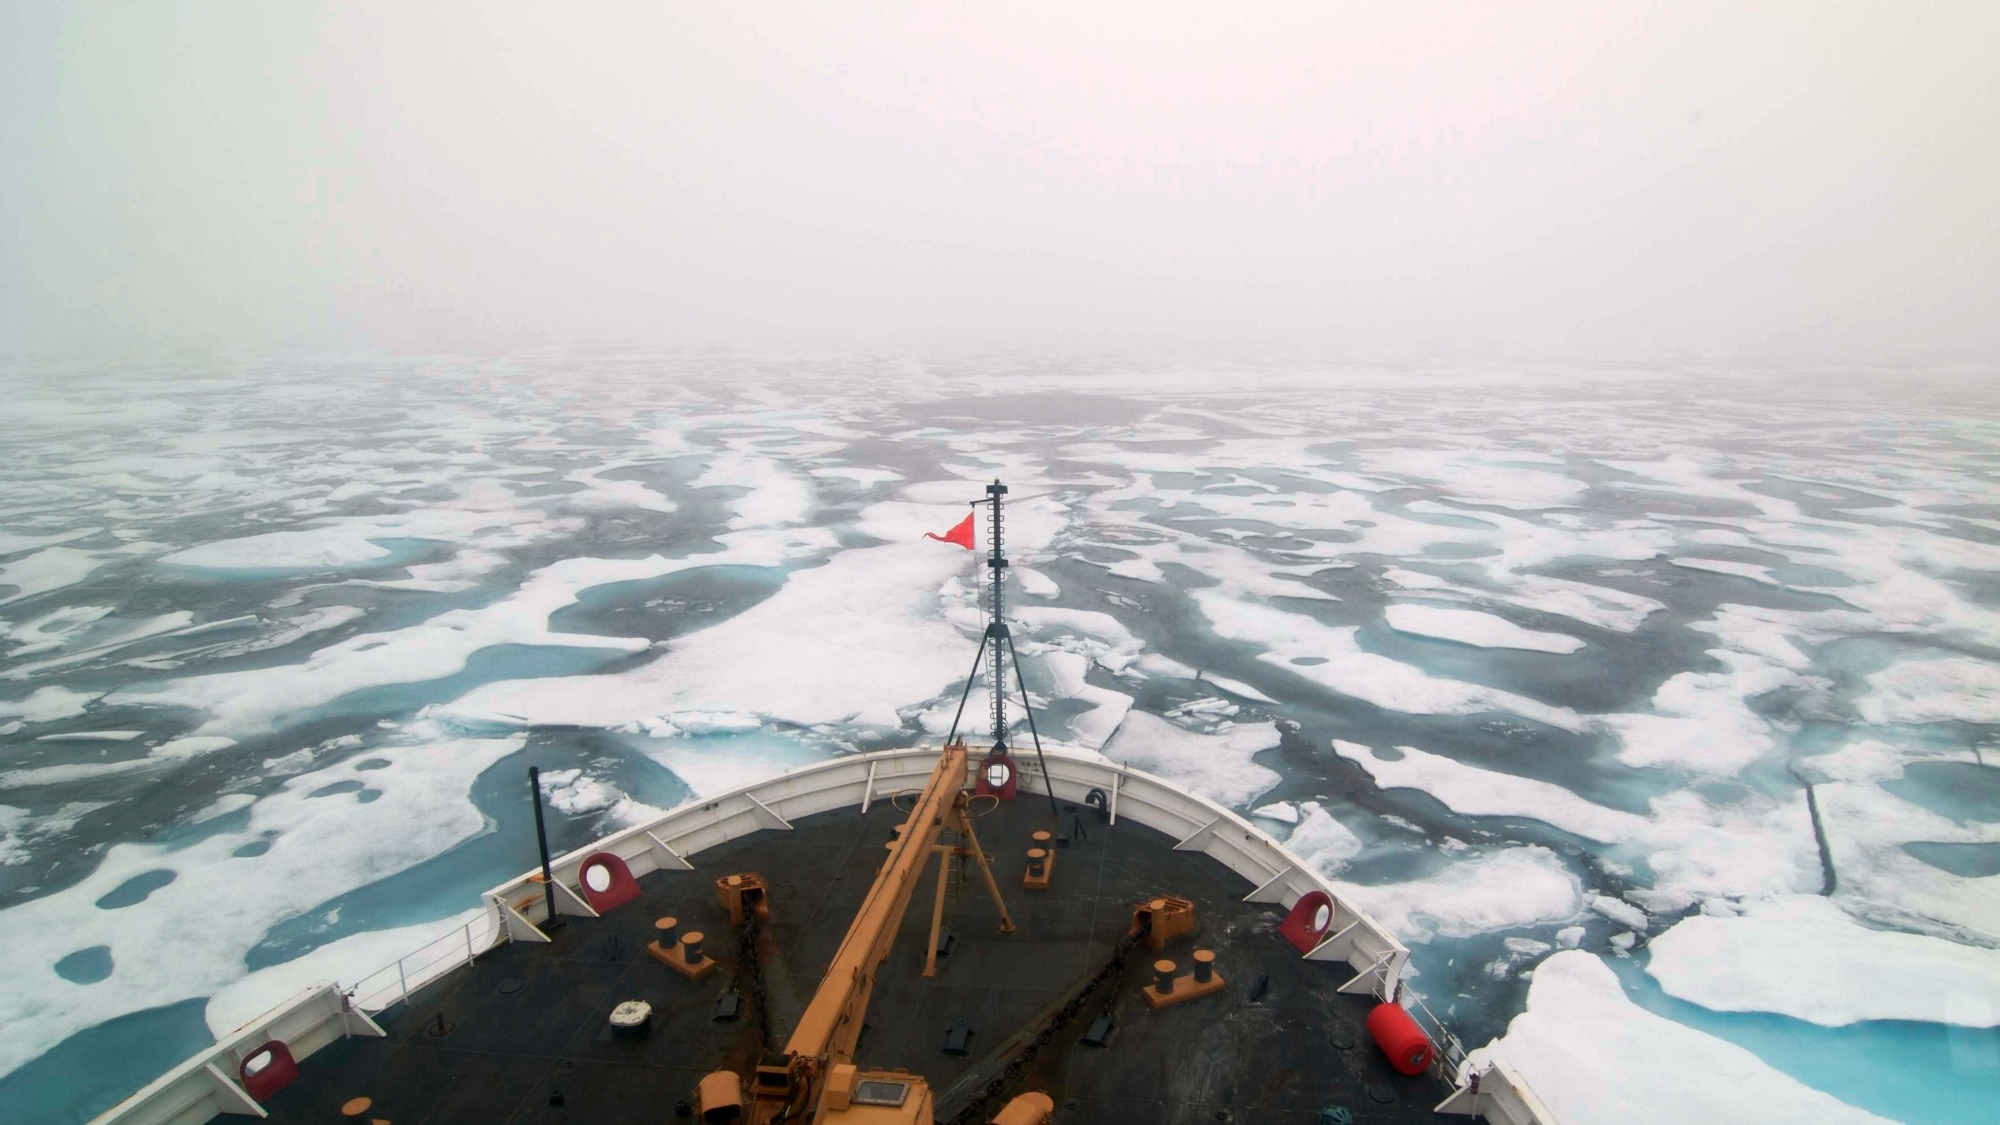 Shipping in the Arctic is increasing